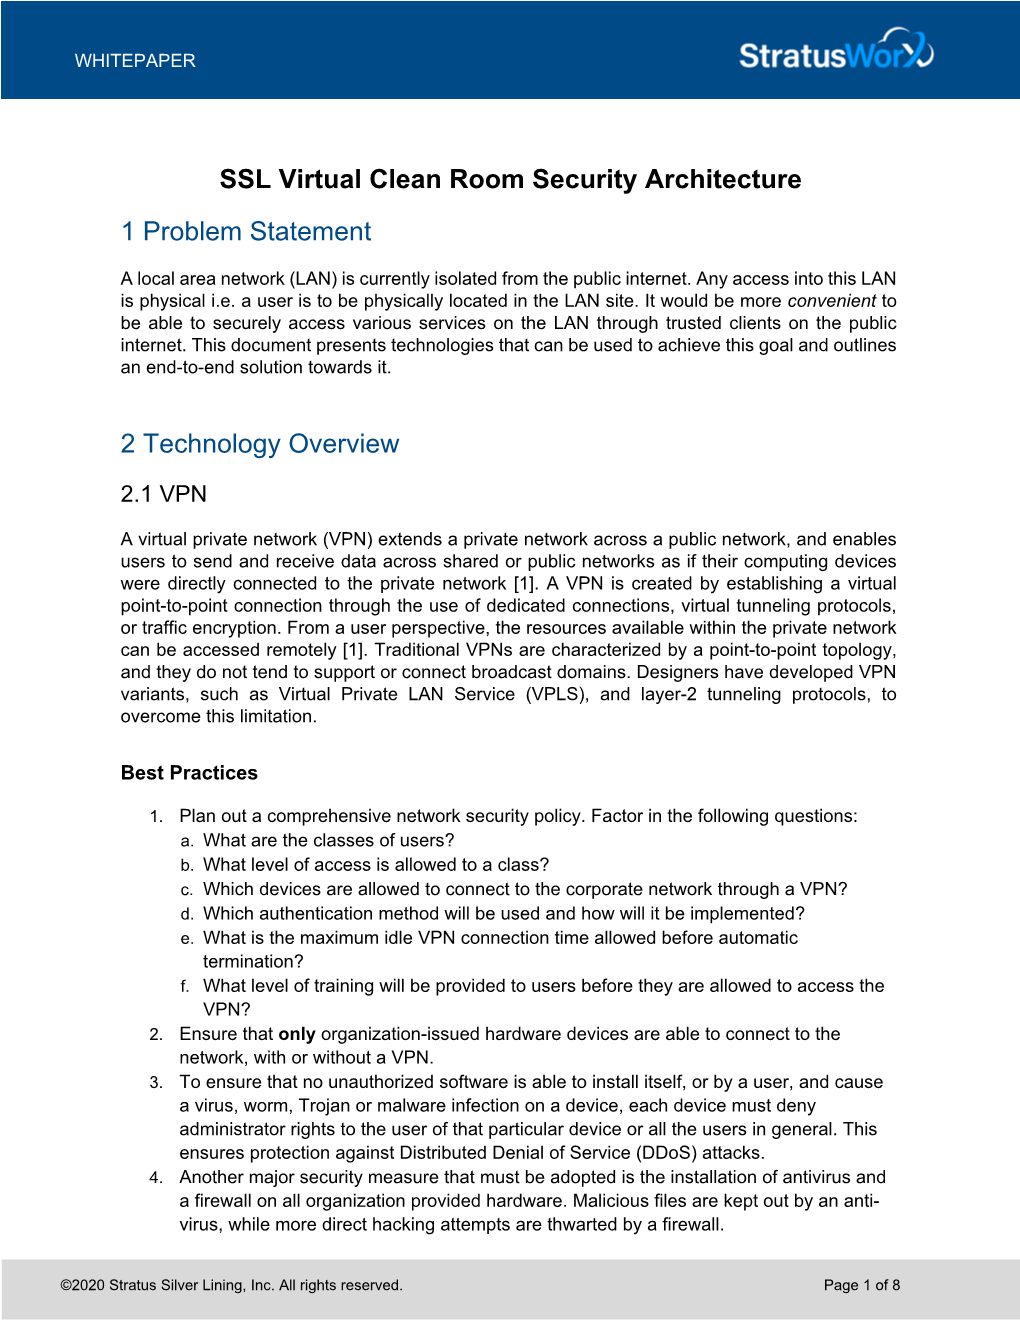 SSL Virtual Clean Room Security Architecture 1 Problem Statement 2 Technology Overview